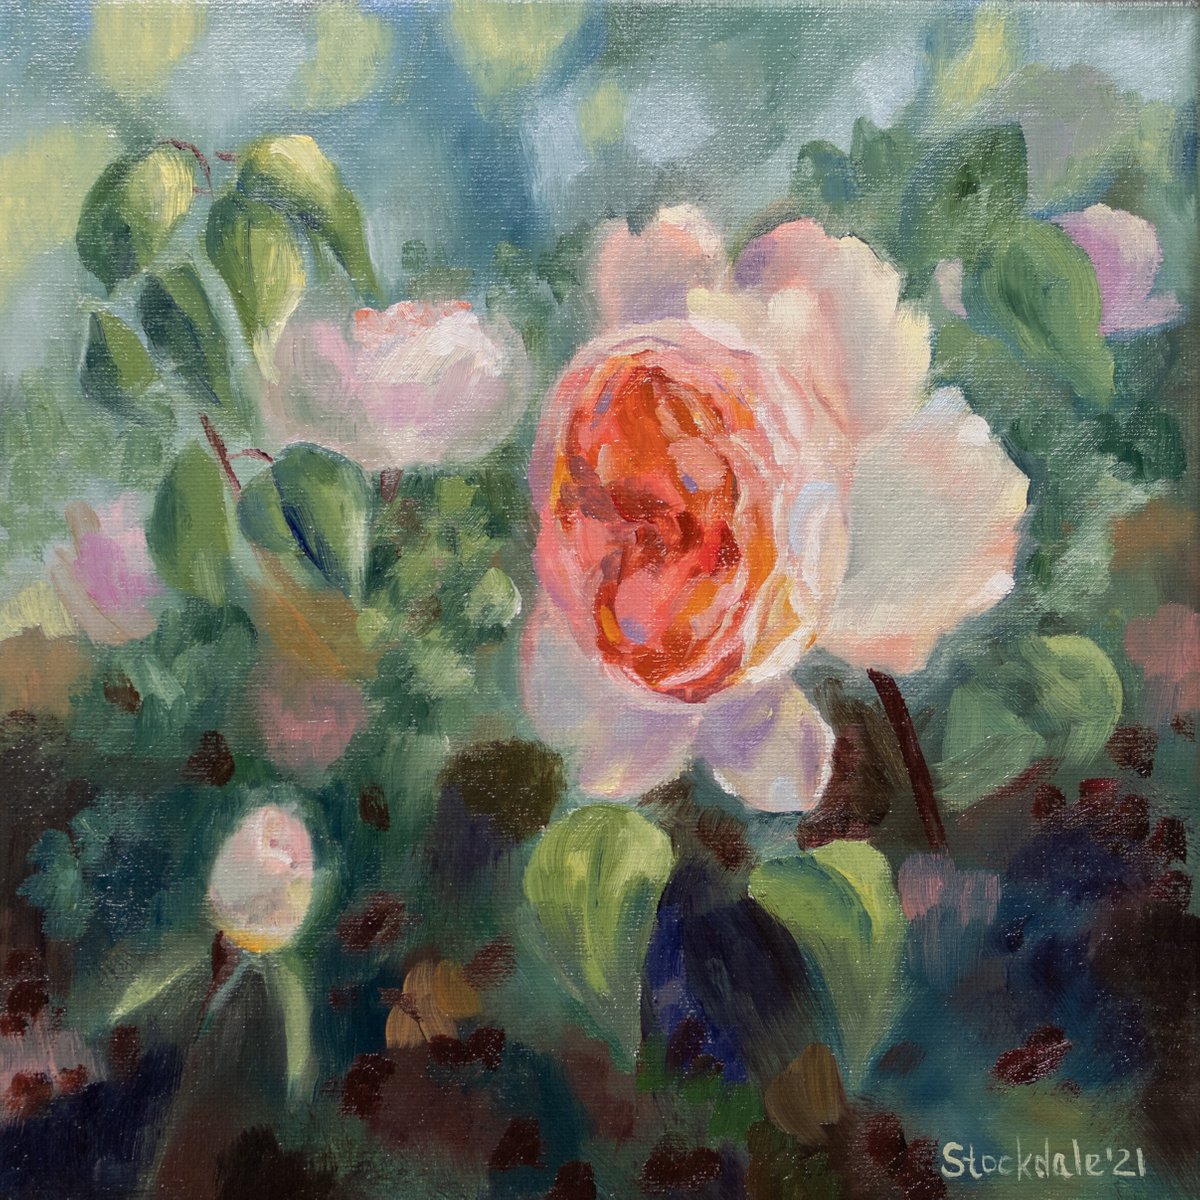 Study of a rose by Maria Stockdale